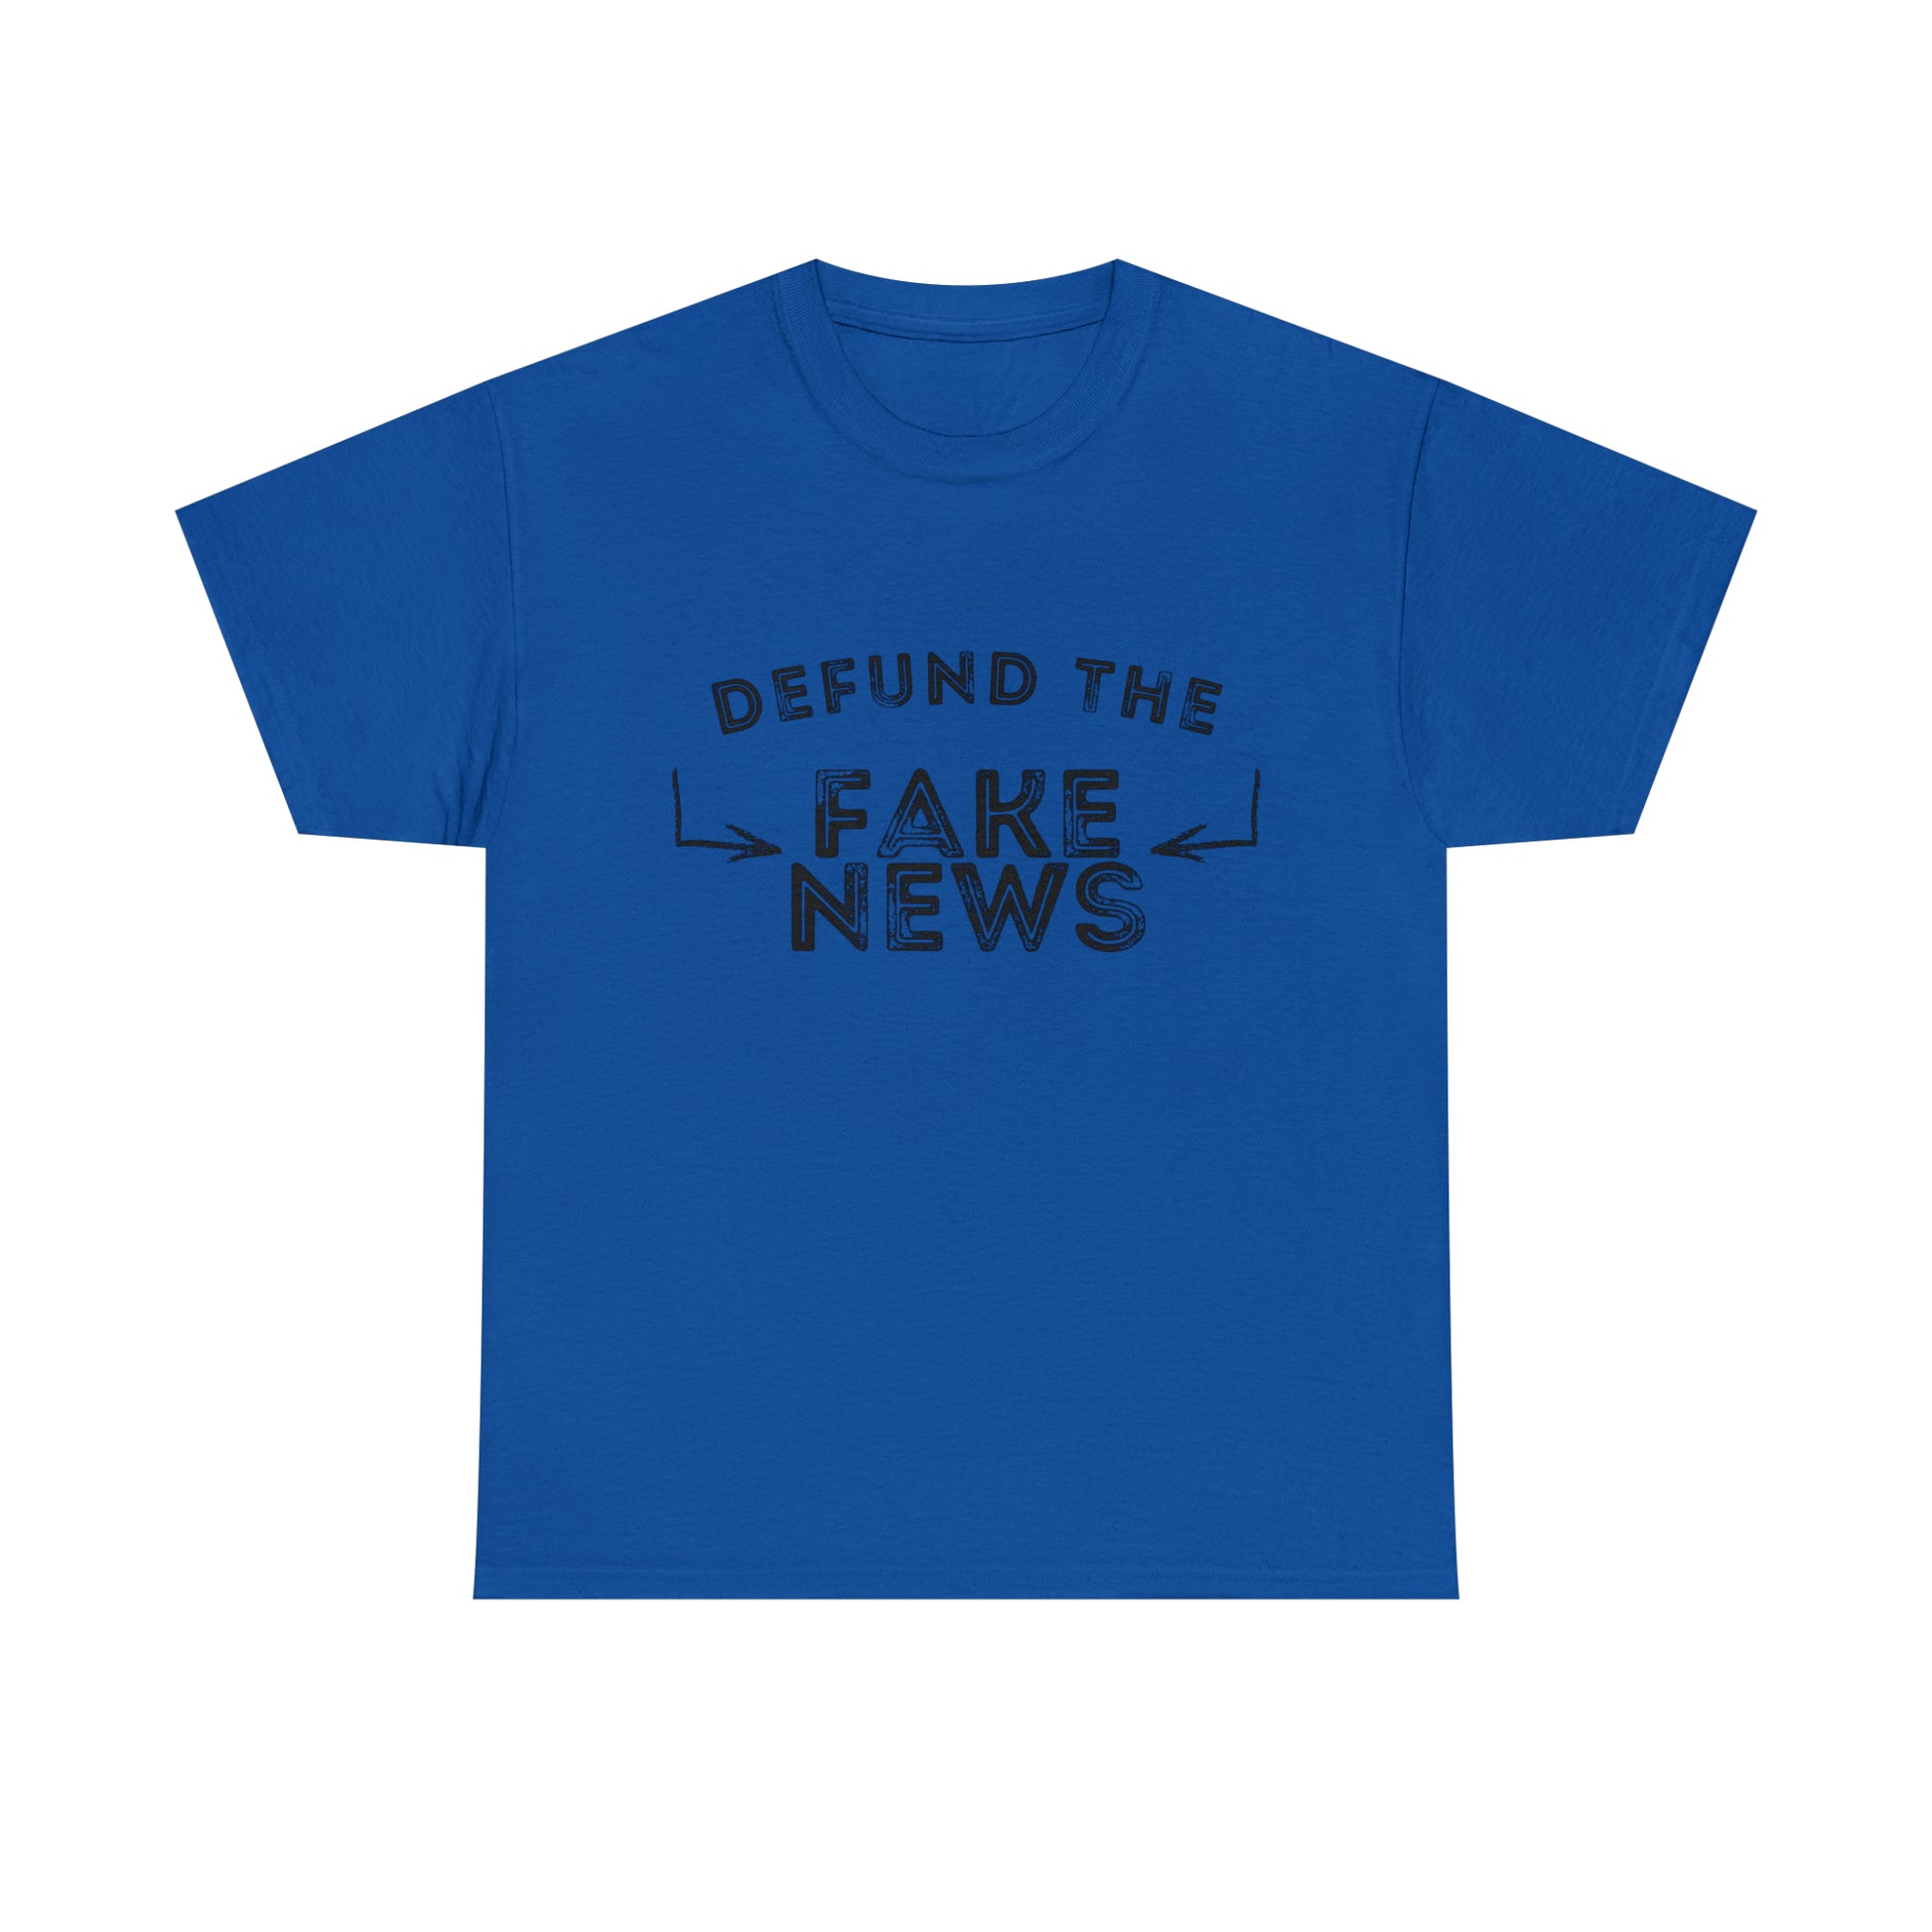 "Bold statement shirt against biased reporting"